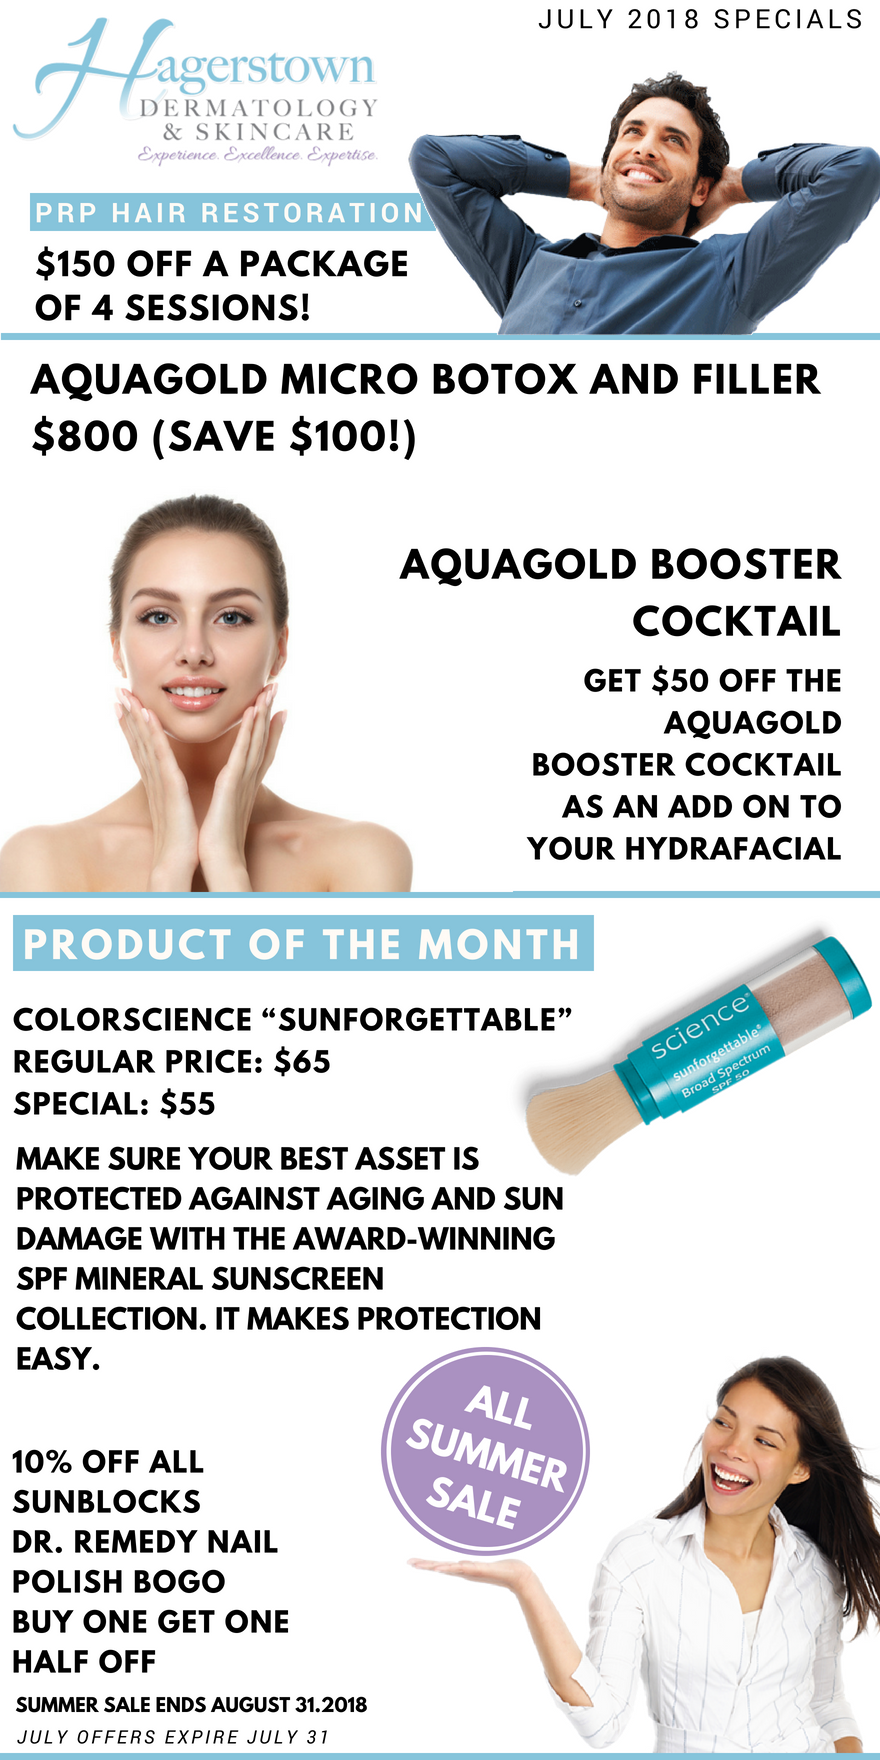 Make sure your best asset is protected against aging and sun damage ...